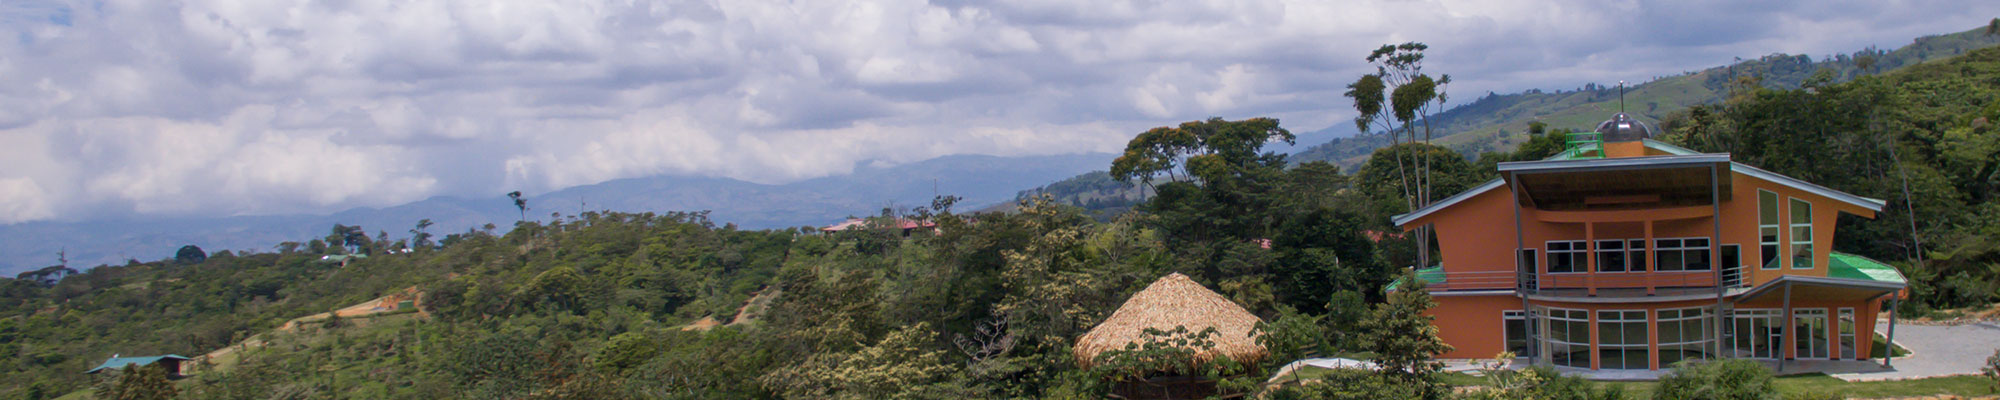 This is an image of the Lillian M Wright Centre at our EcoCampus in Costa Rica,